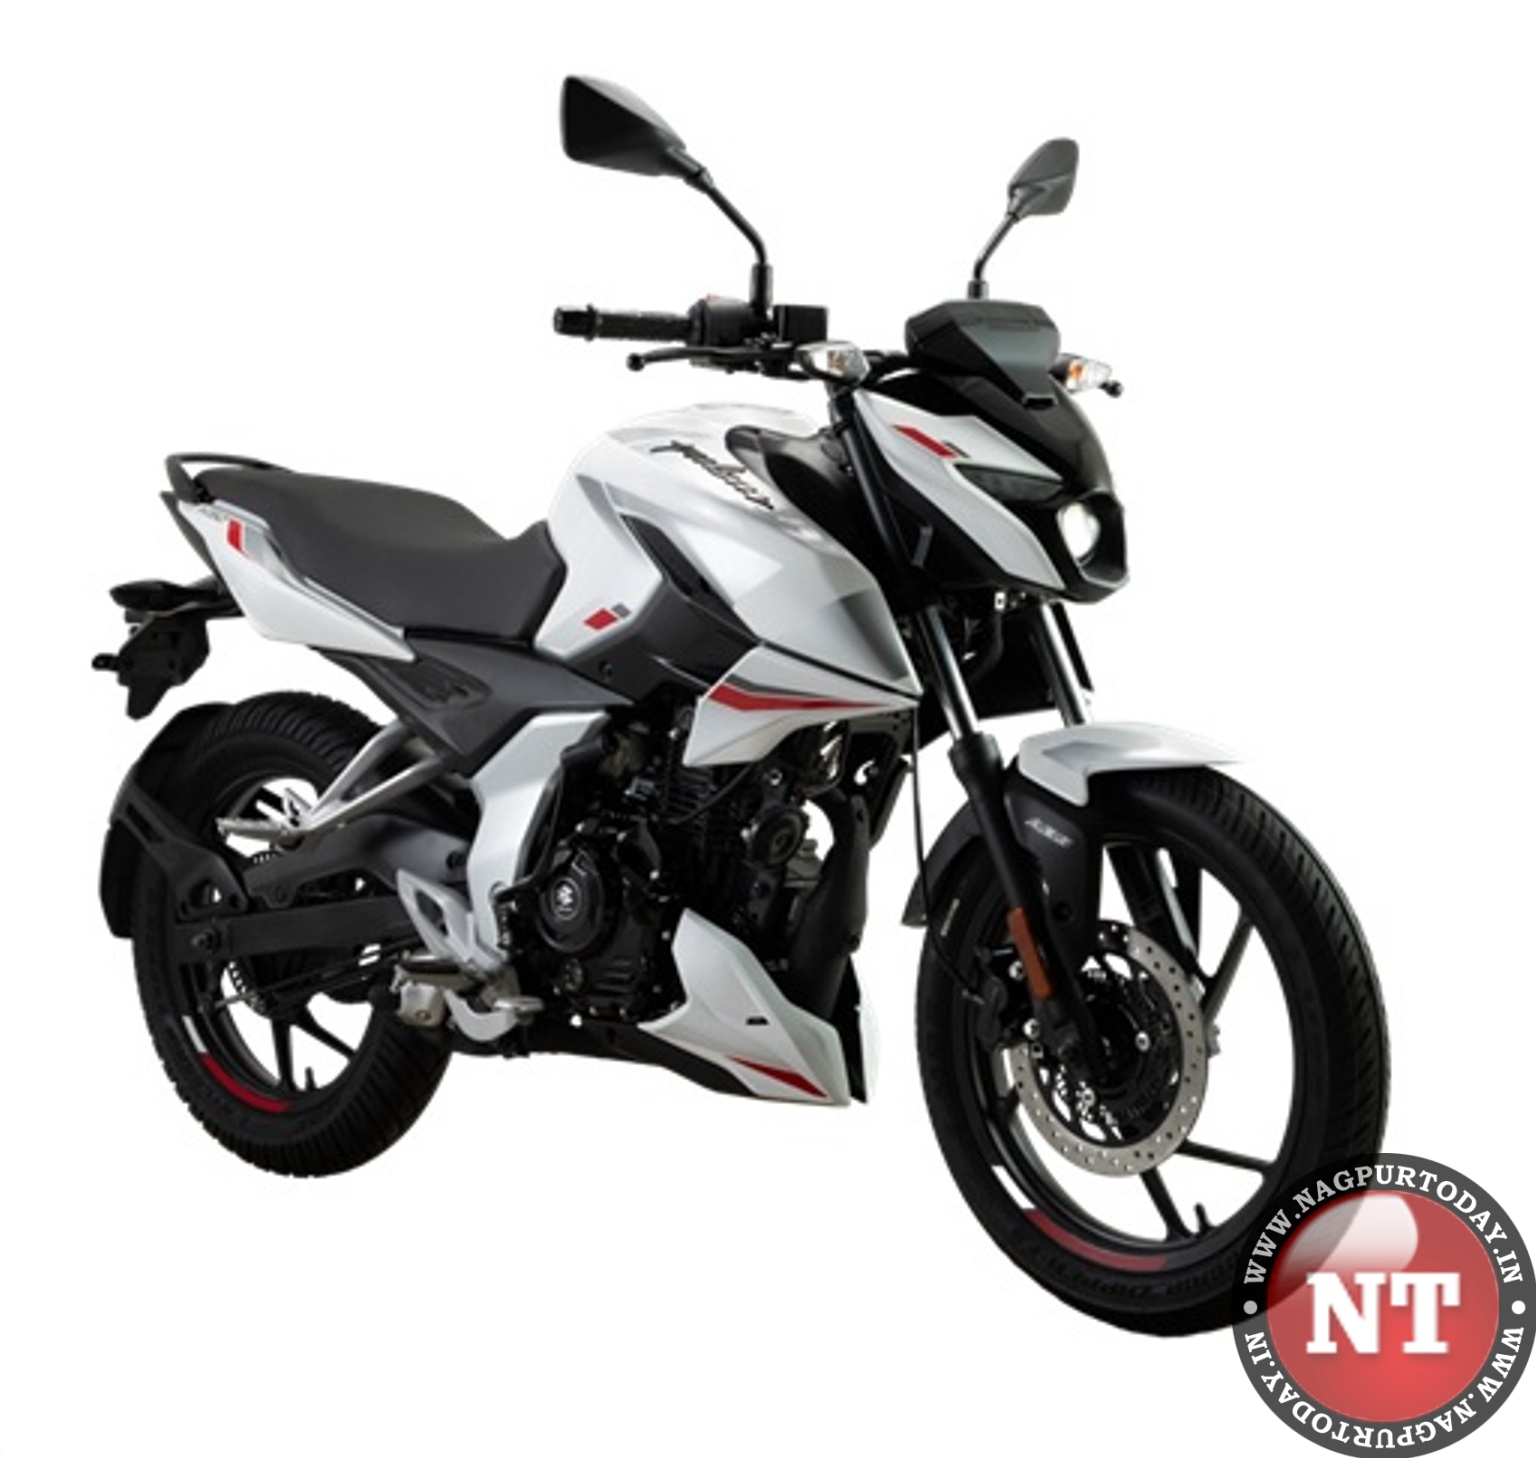 Bajaj Auto launches the Pulsar N150, India's Favourite 150cc in a